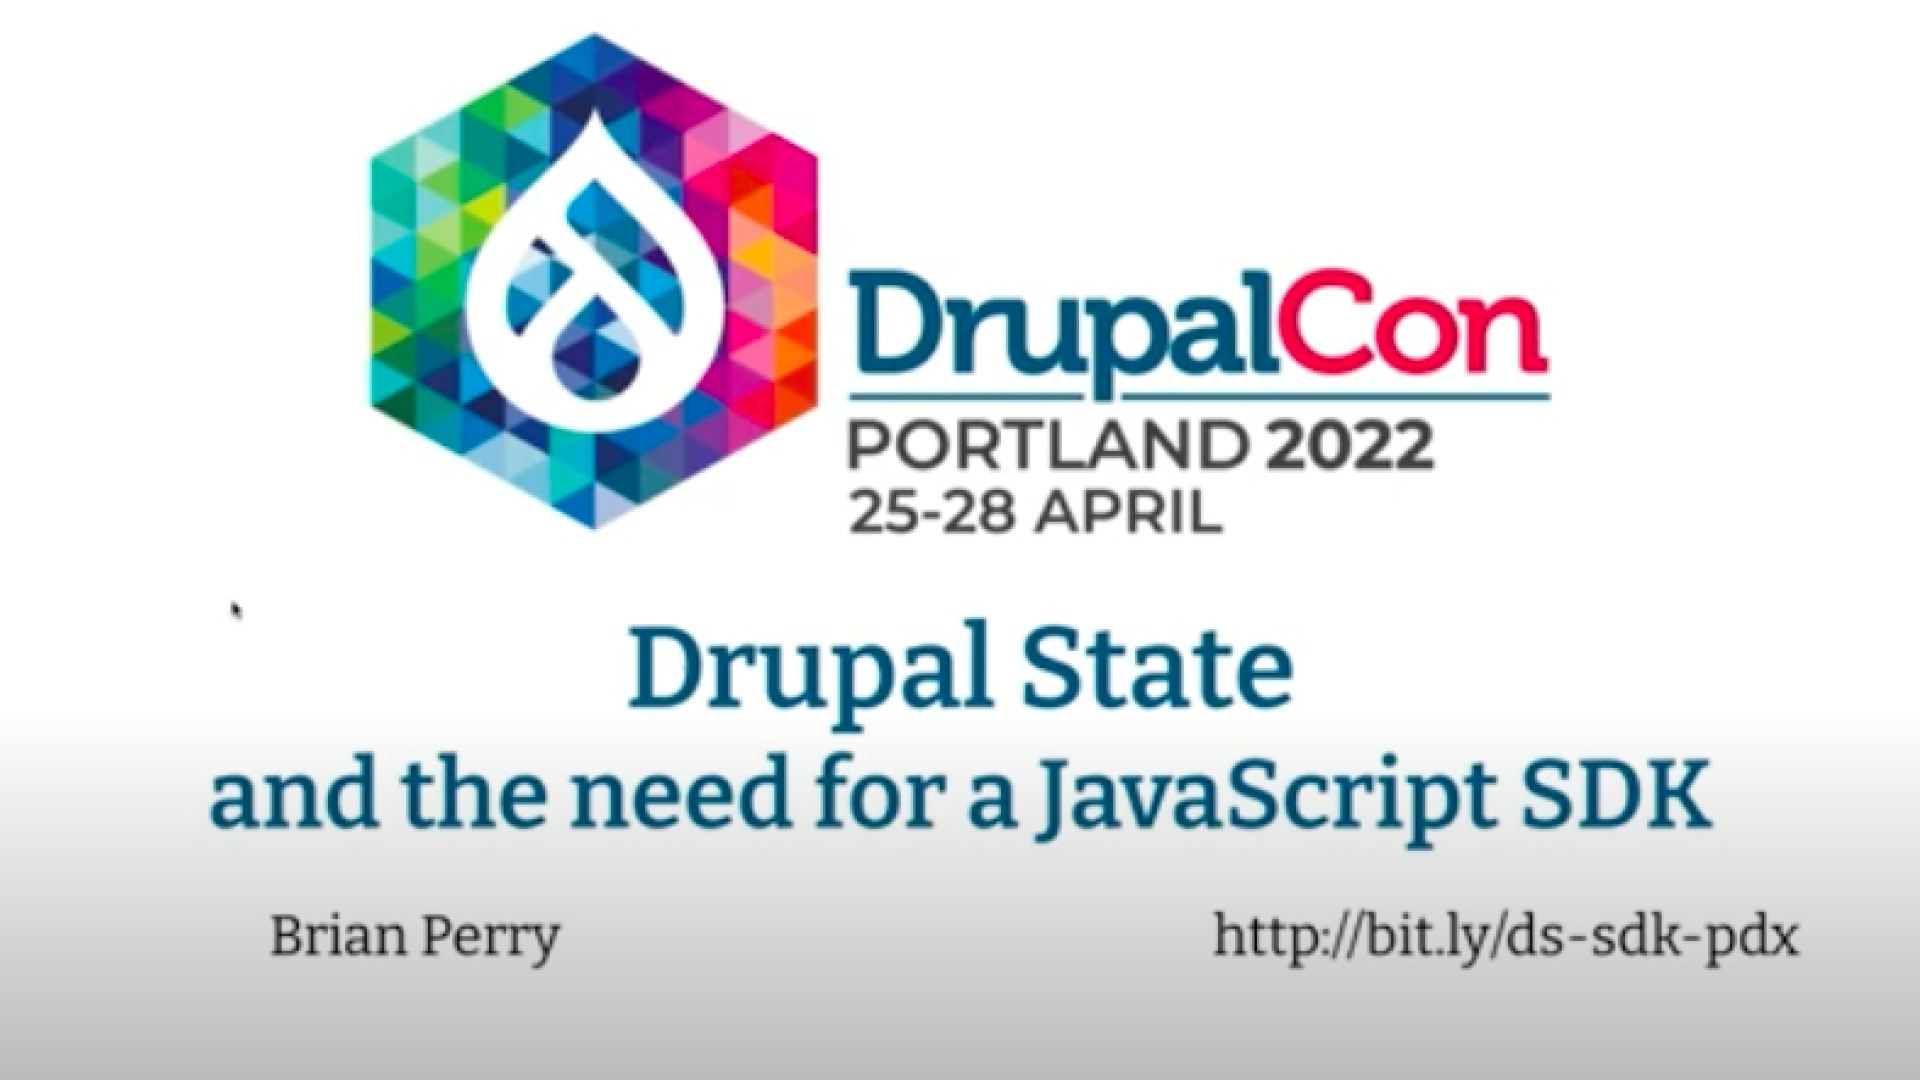 Drupal State and the need for a JavaScript SDK